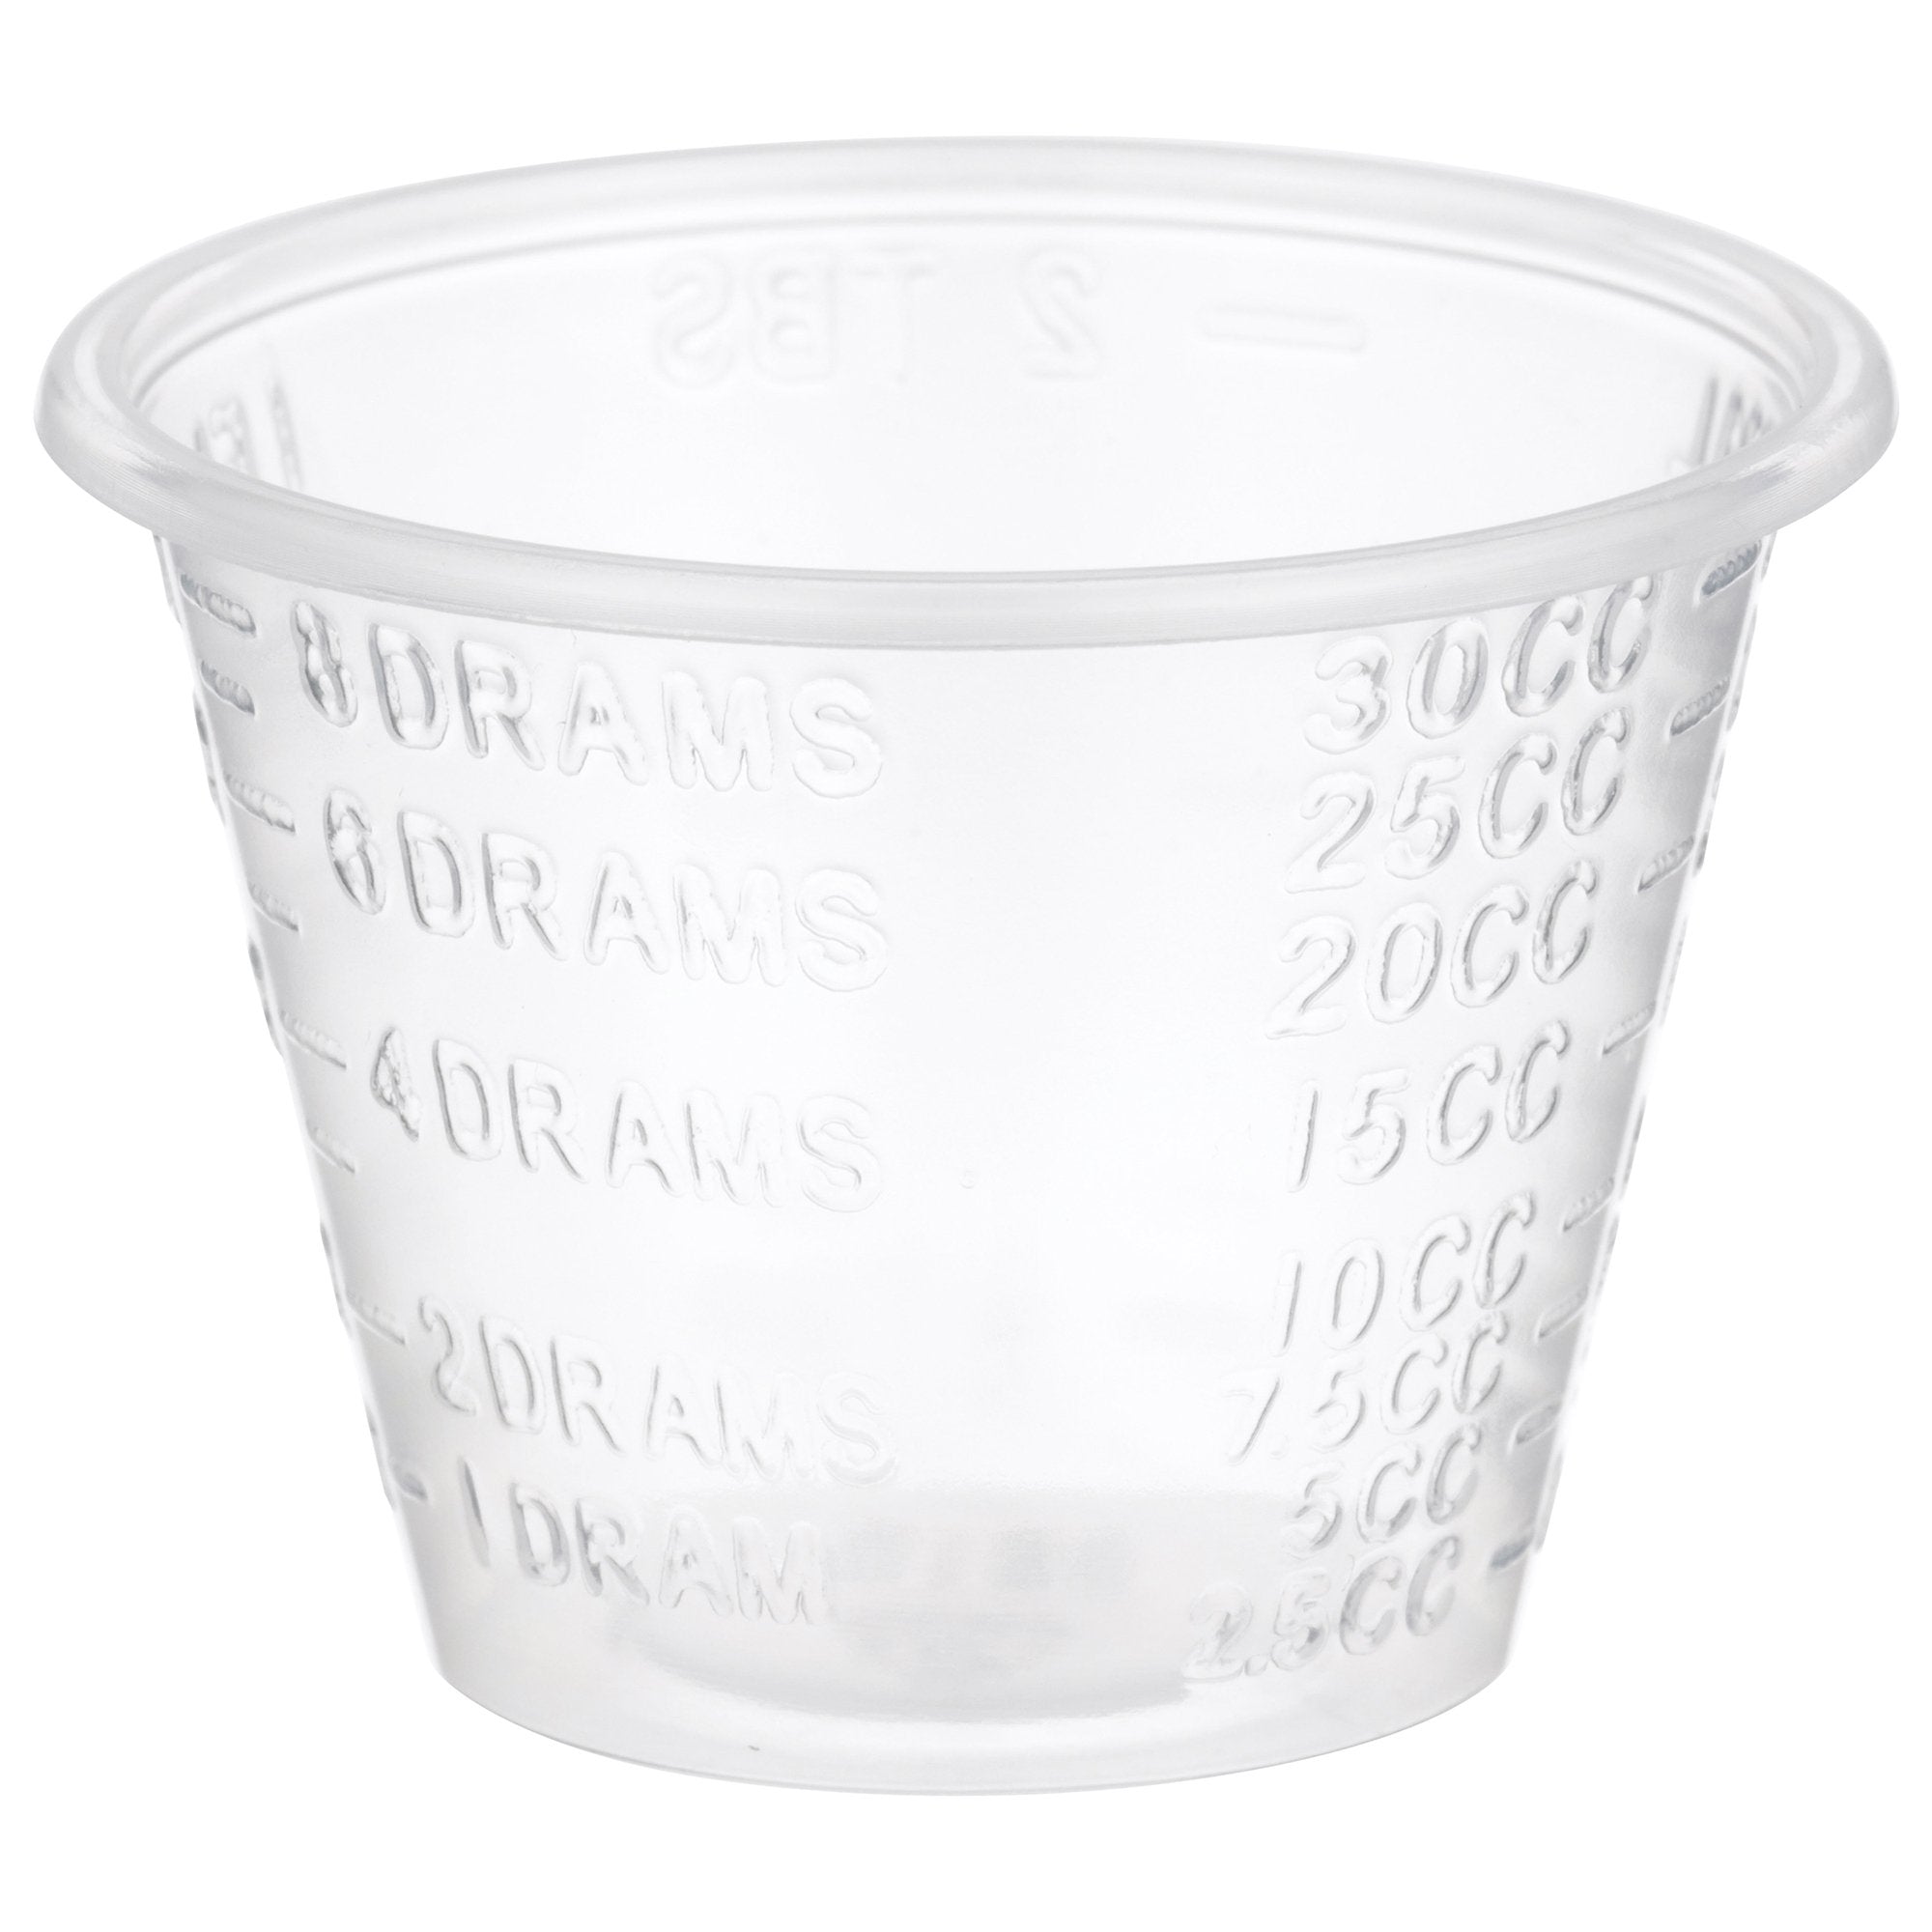 McKesson 1 oz Clear Graduated Medicine Cups - Disposable, 100 Pack